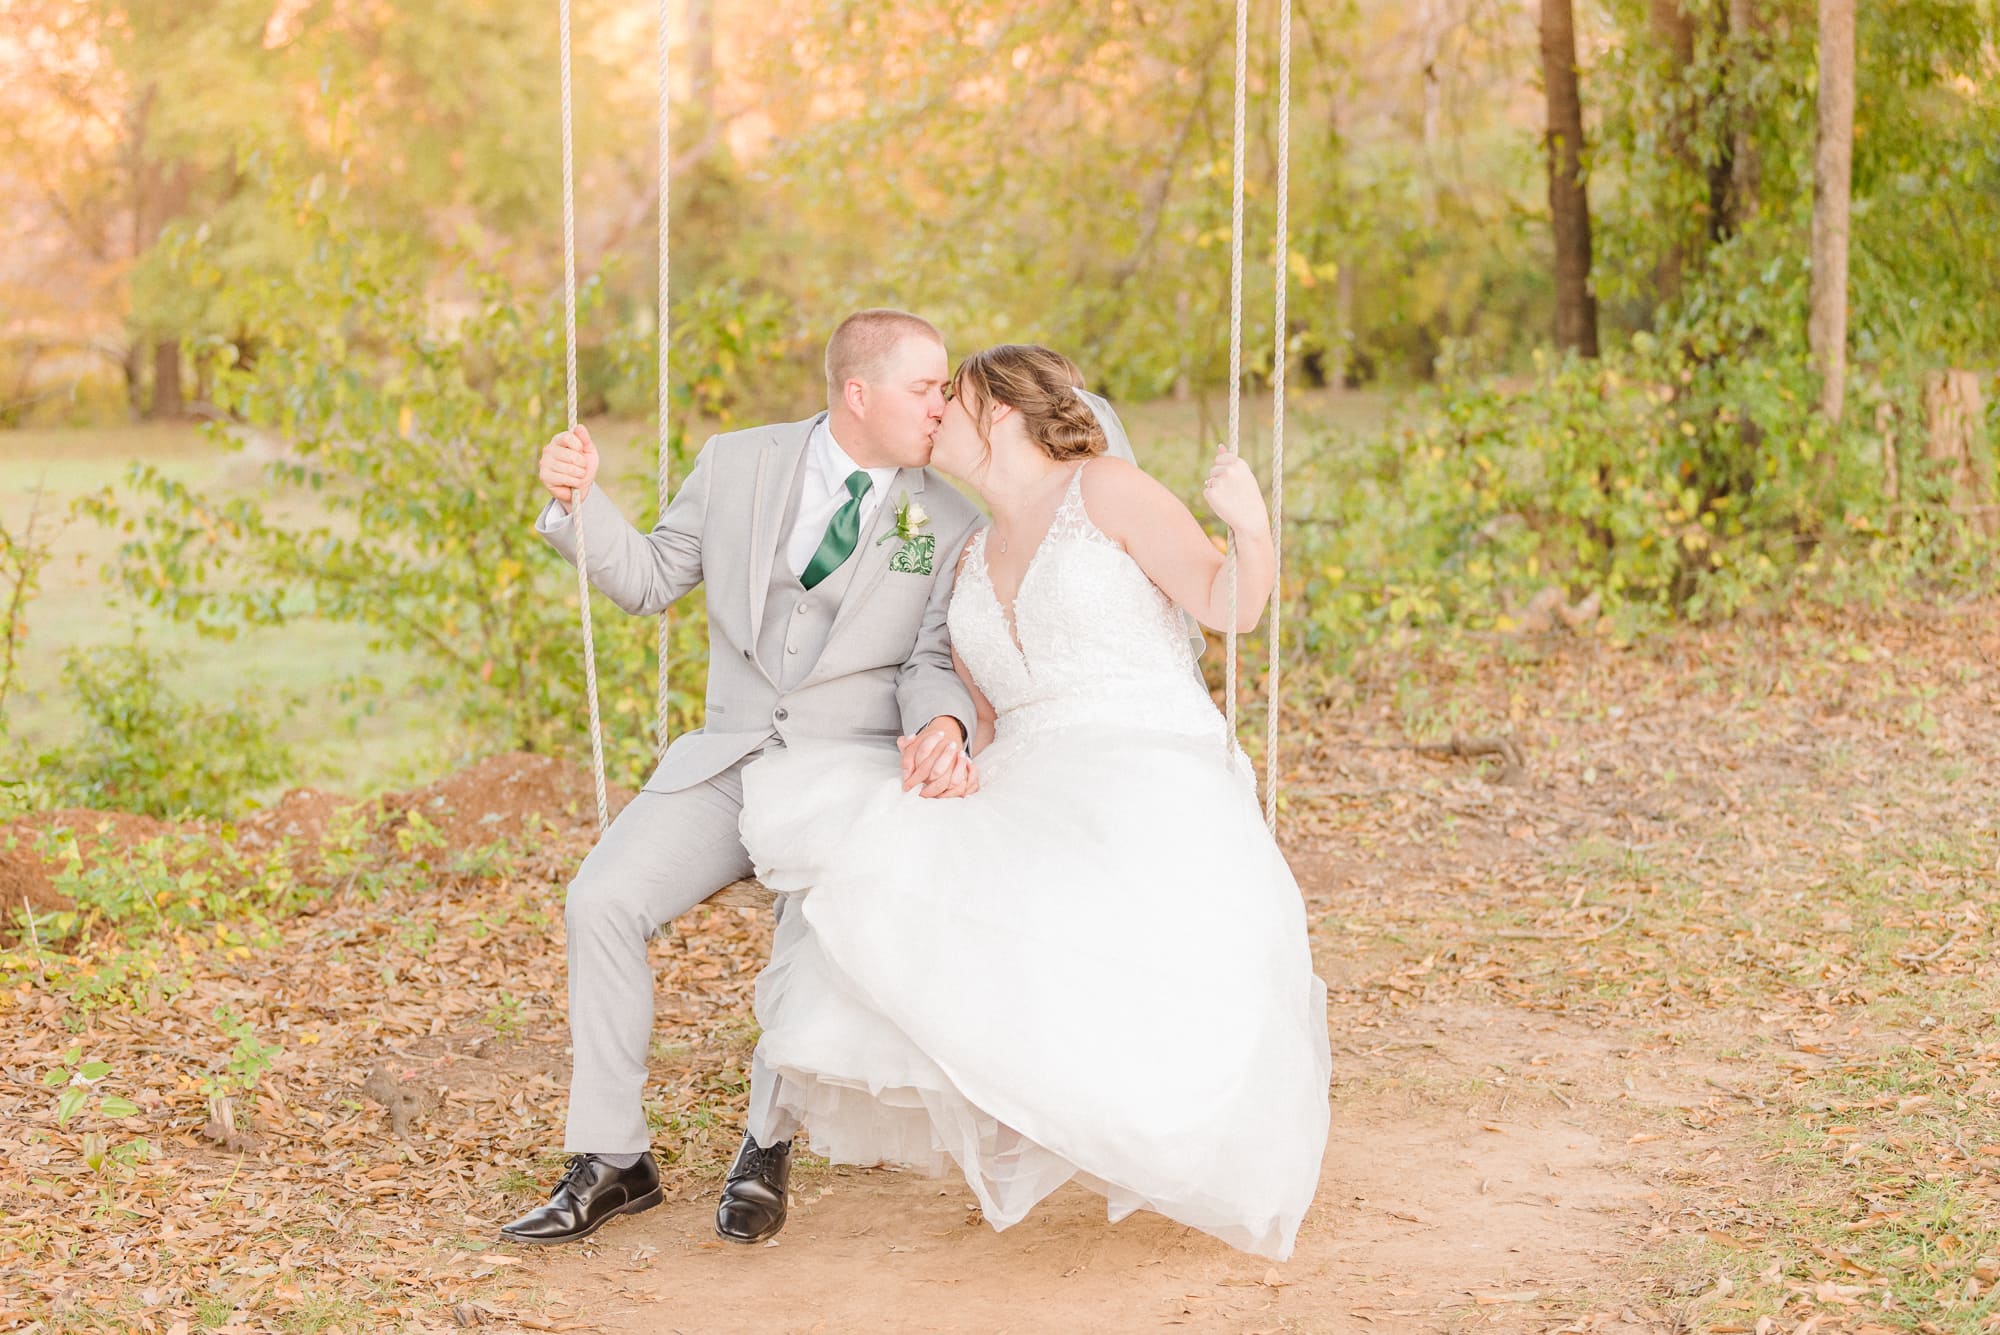 Katelynn and Alec kiss on the swinging bench on the grounds of the Low Meadows Estate wedding venue.